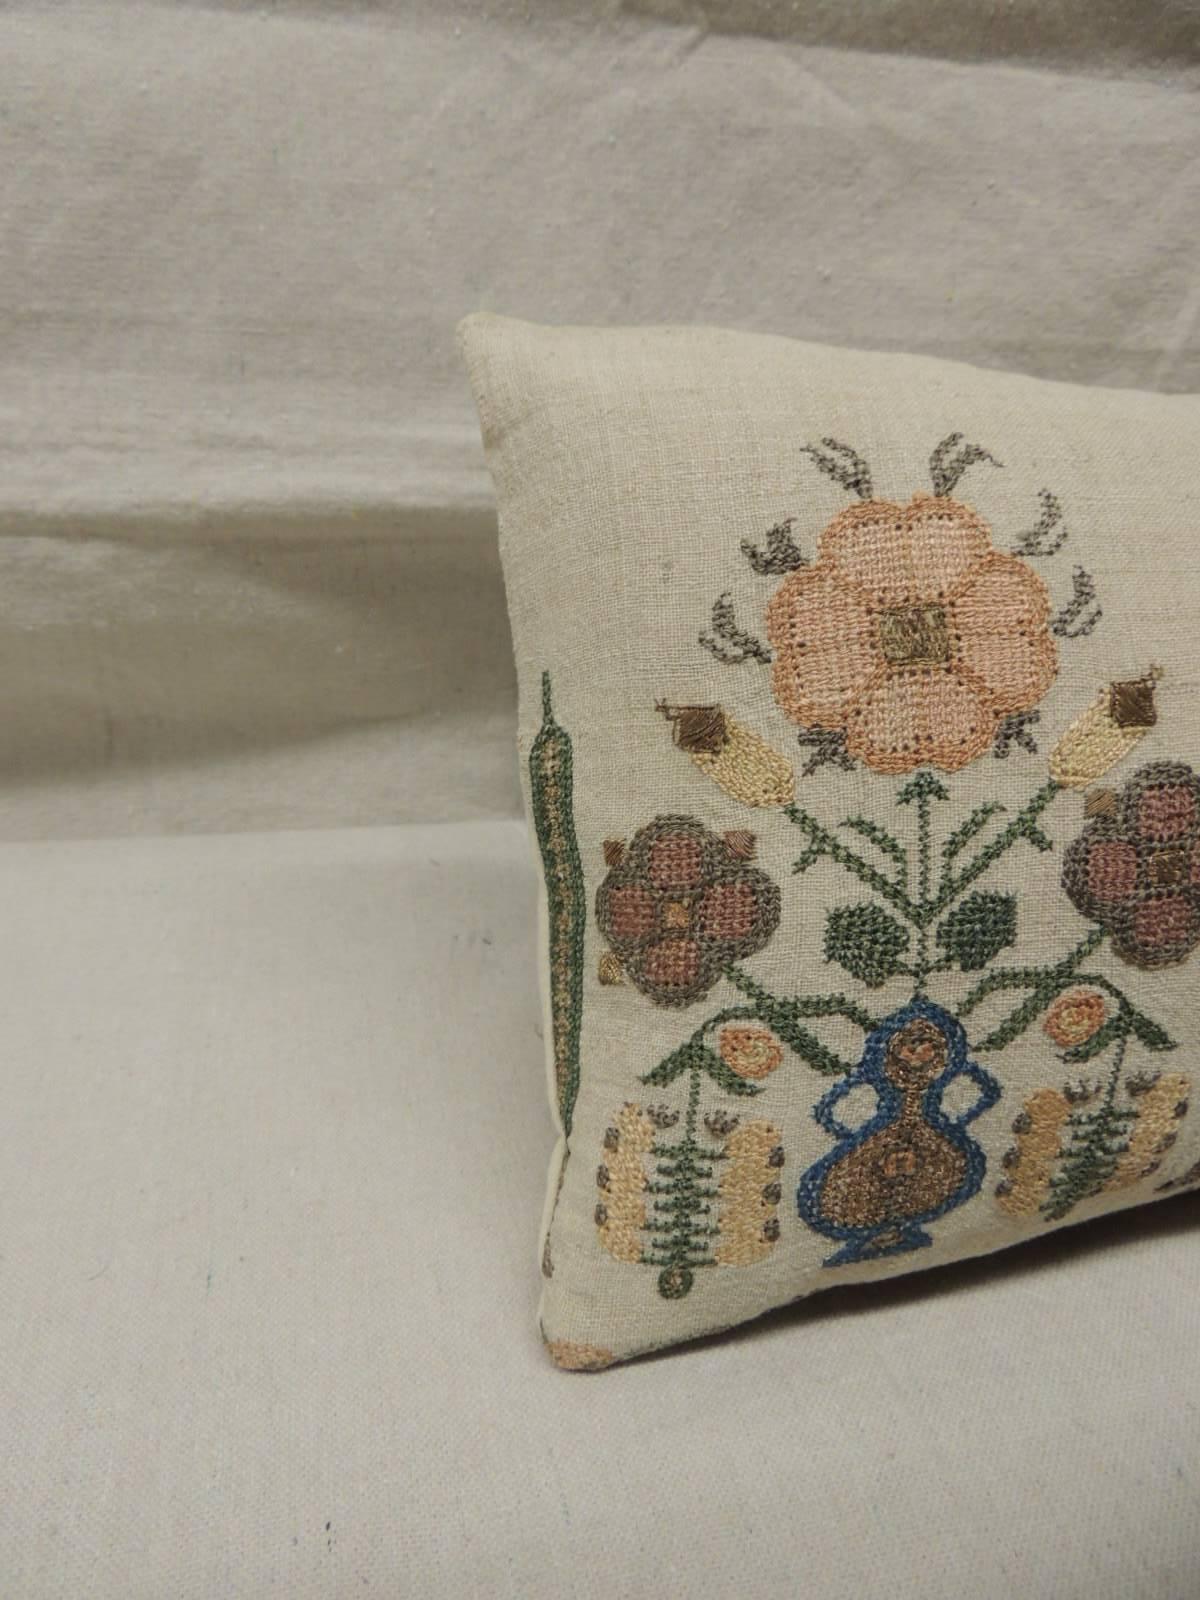 Turkish petite embroidery silk on linen pillow with metallic threads adornments.
Depicting flowers in bloom in shades of soft green, yellow, blues and pink.